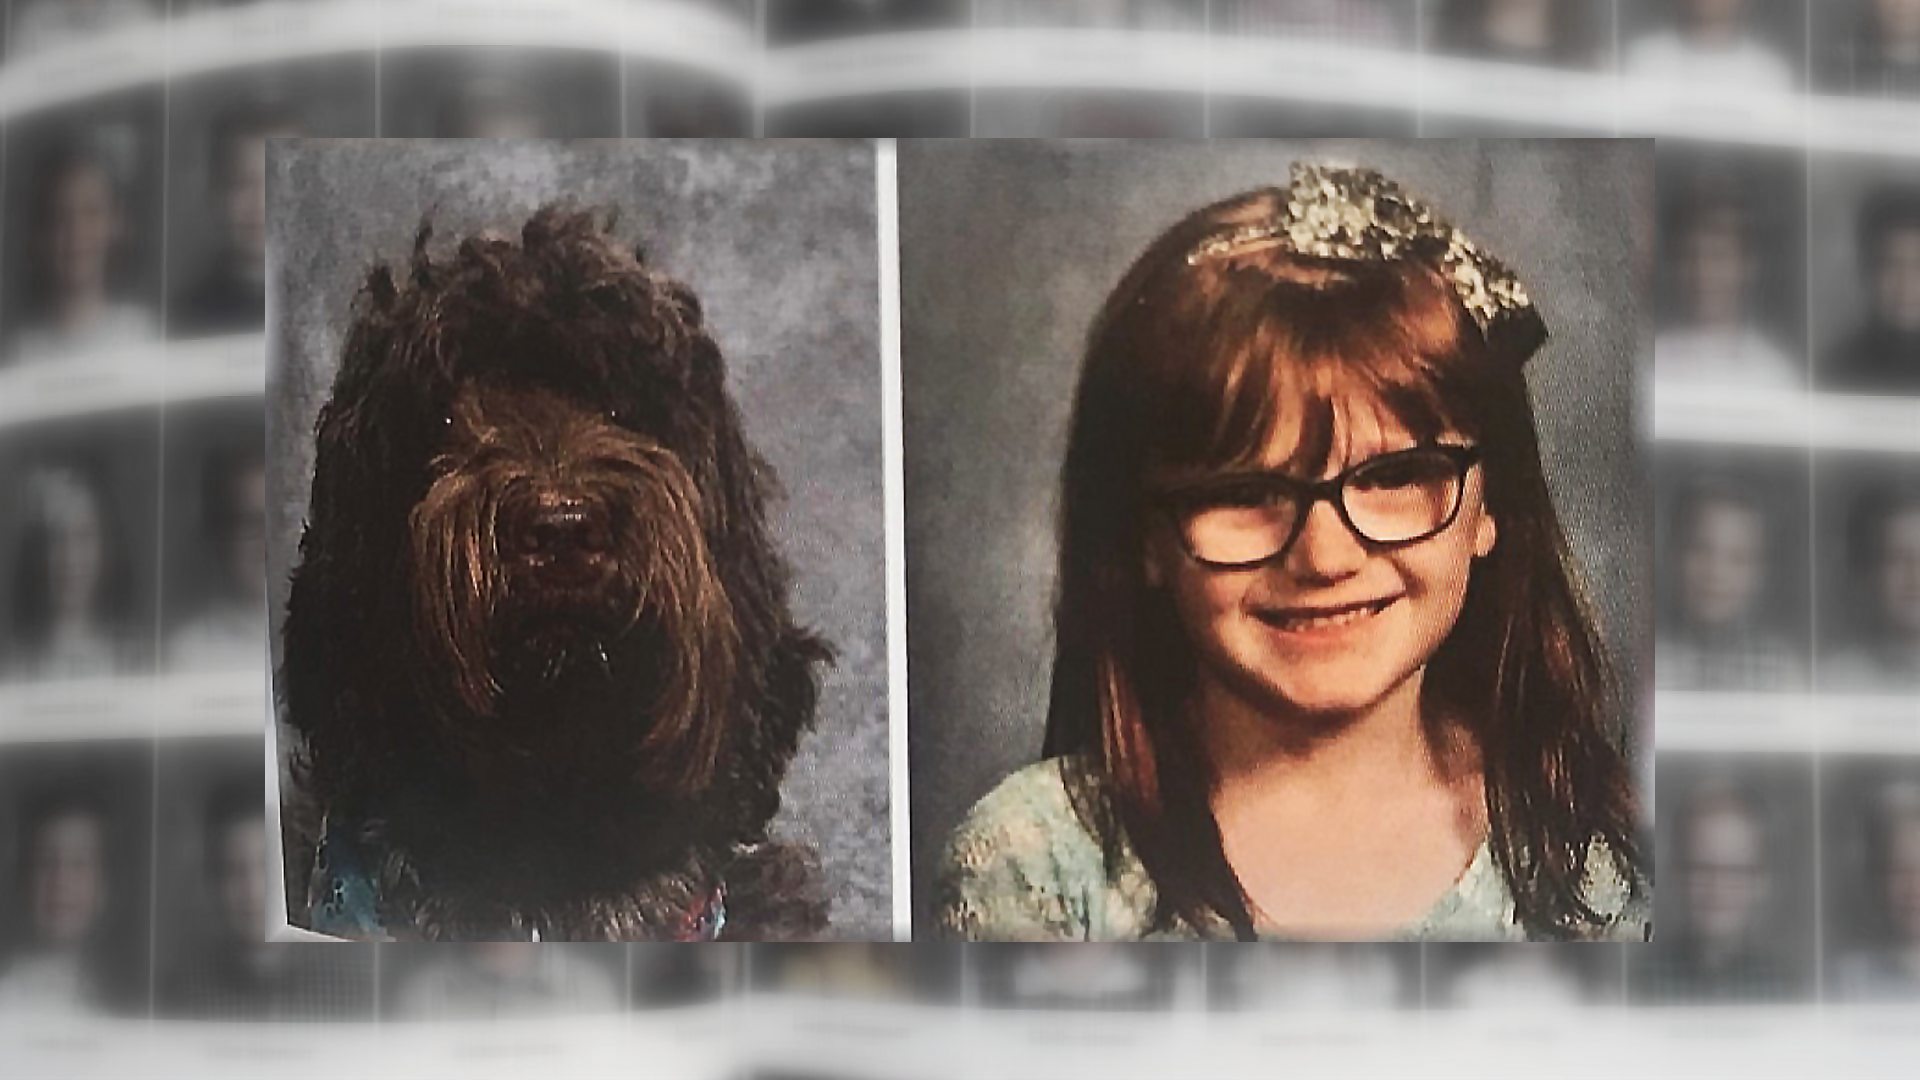 Ariel the Labradoodle is Hadley Jo's constant companion. She rides the bus, watches over Hadley Jo in class and was honored in the yearbook.